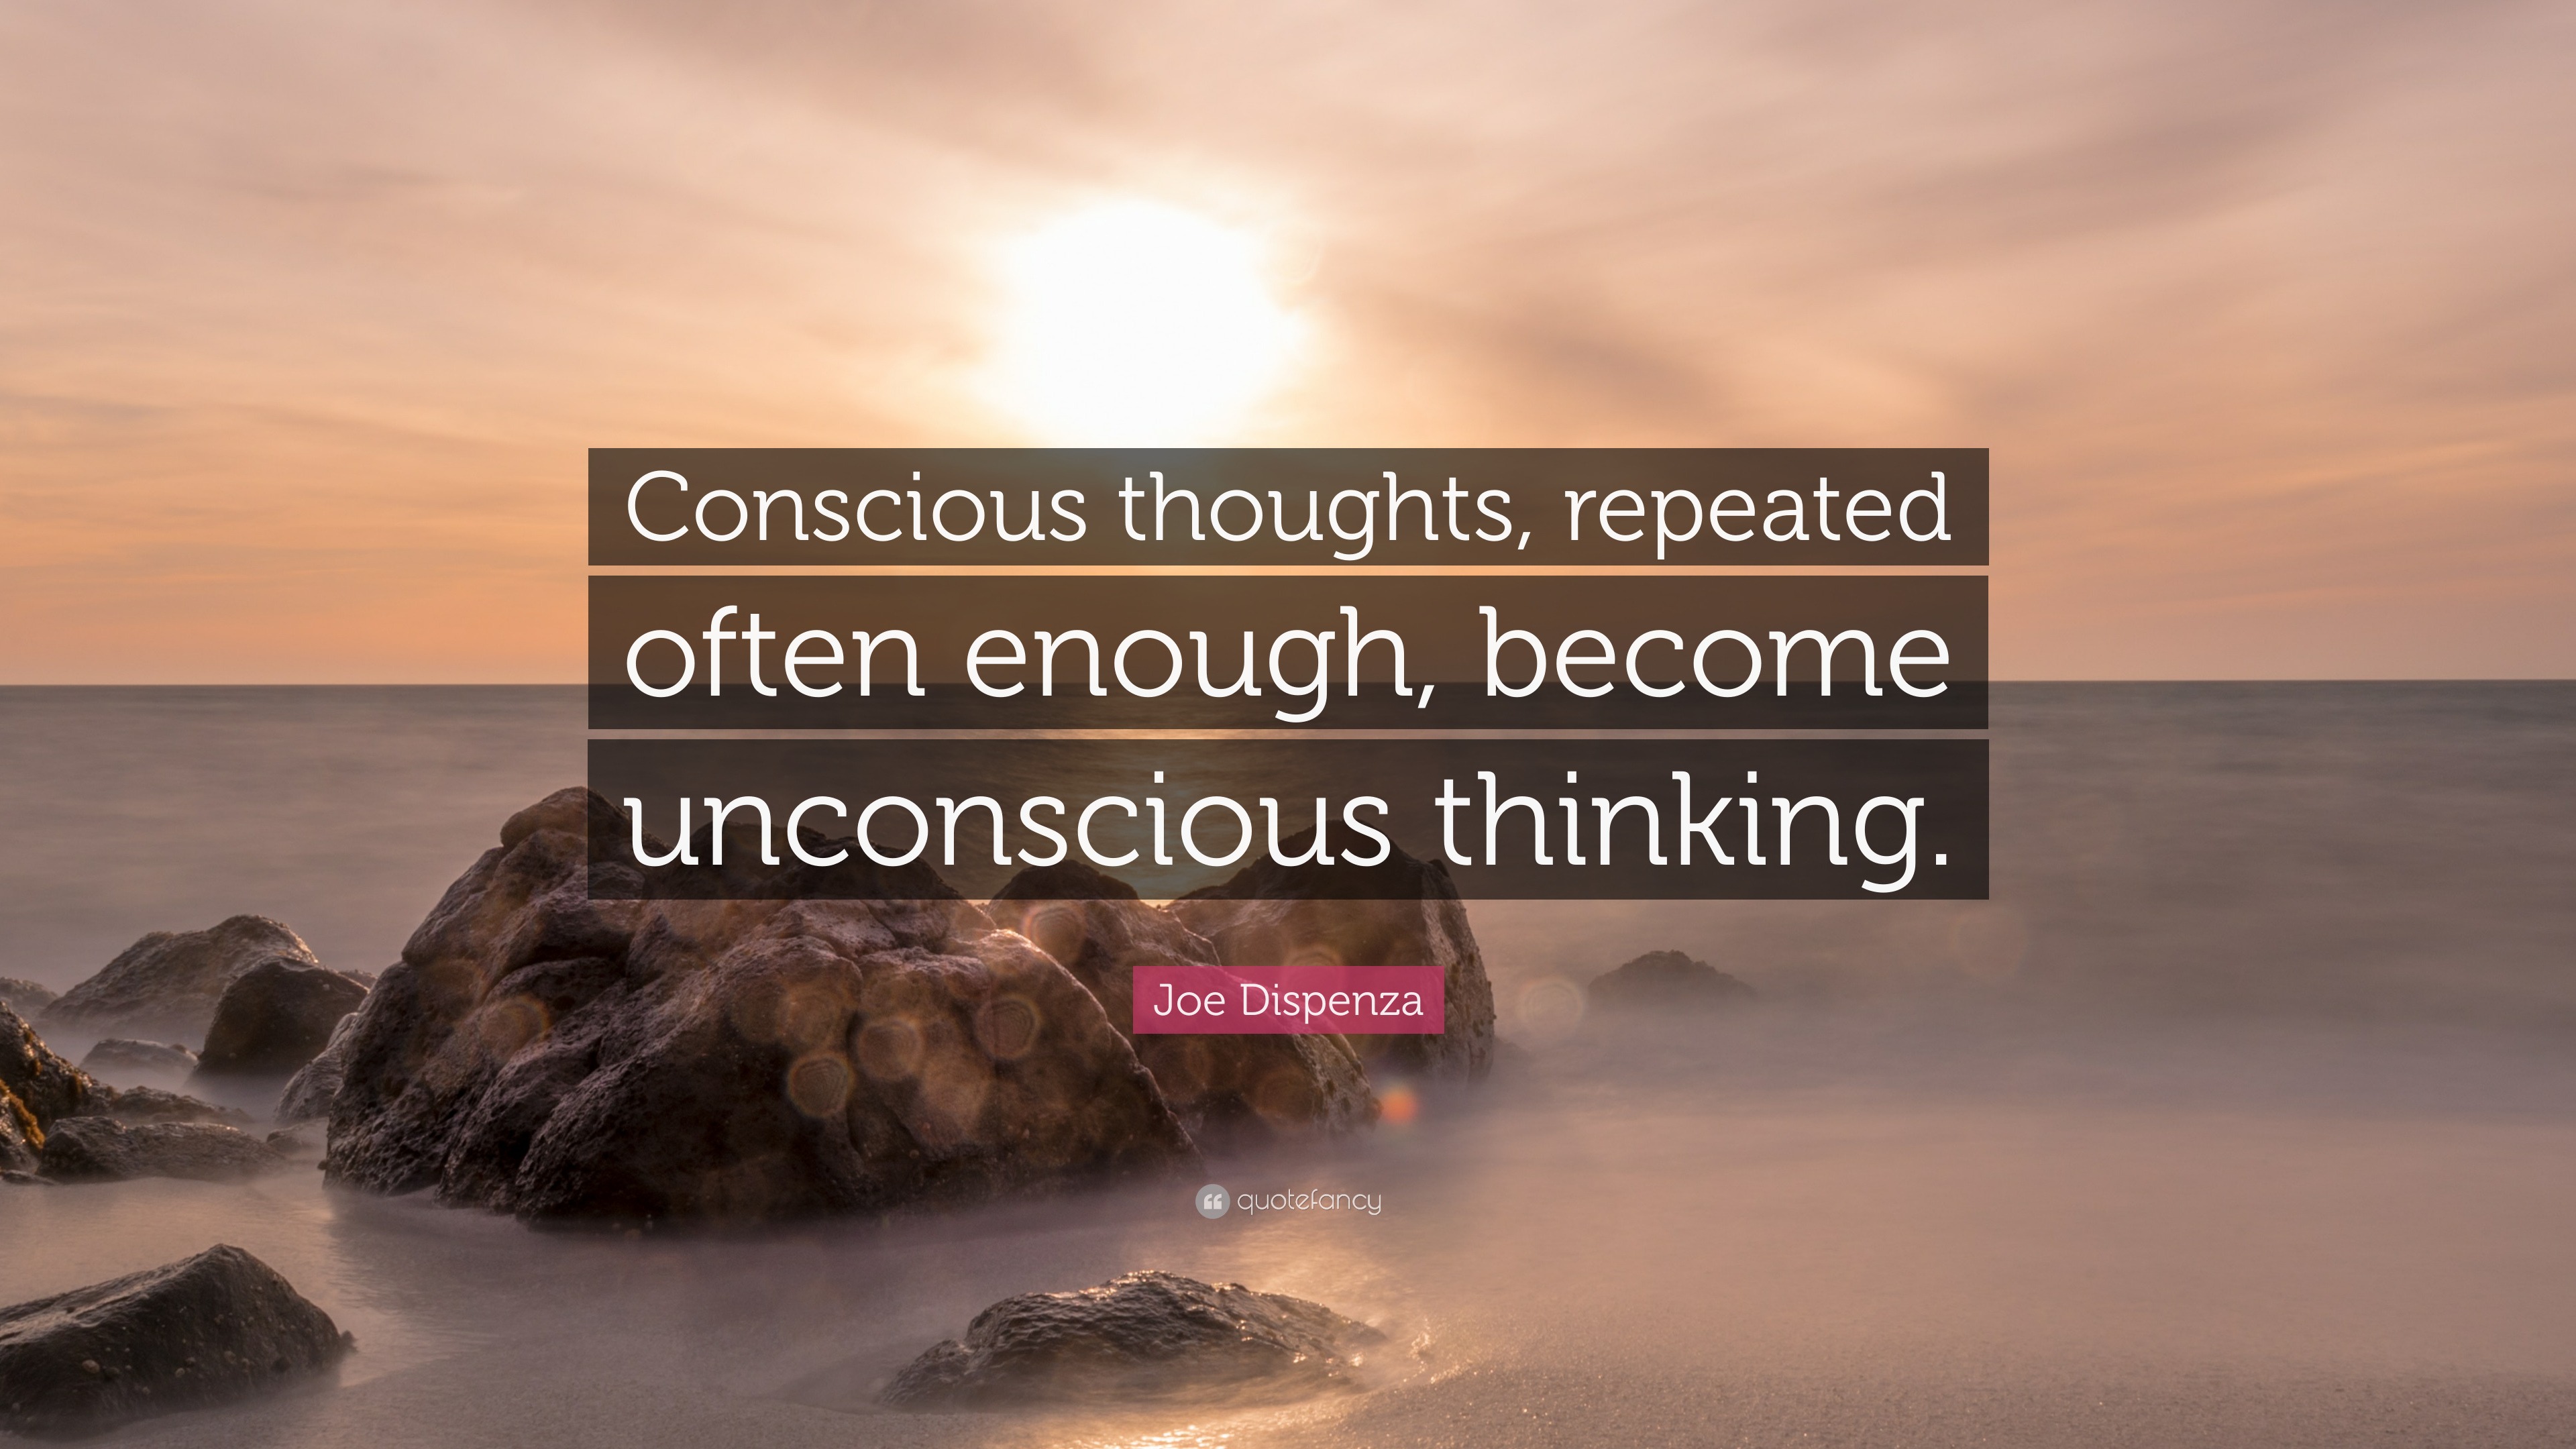 Joe Dispenza Quote: “Conscious thoughts, repeated often enough, become ...